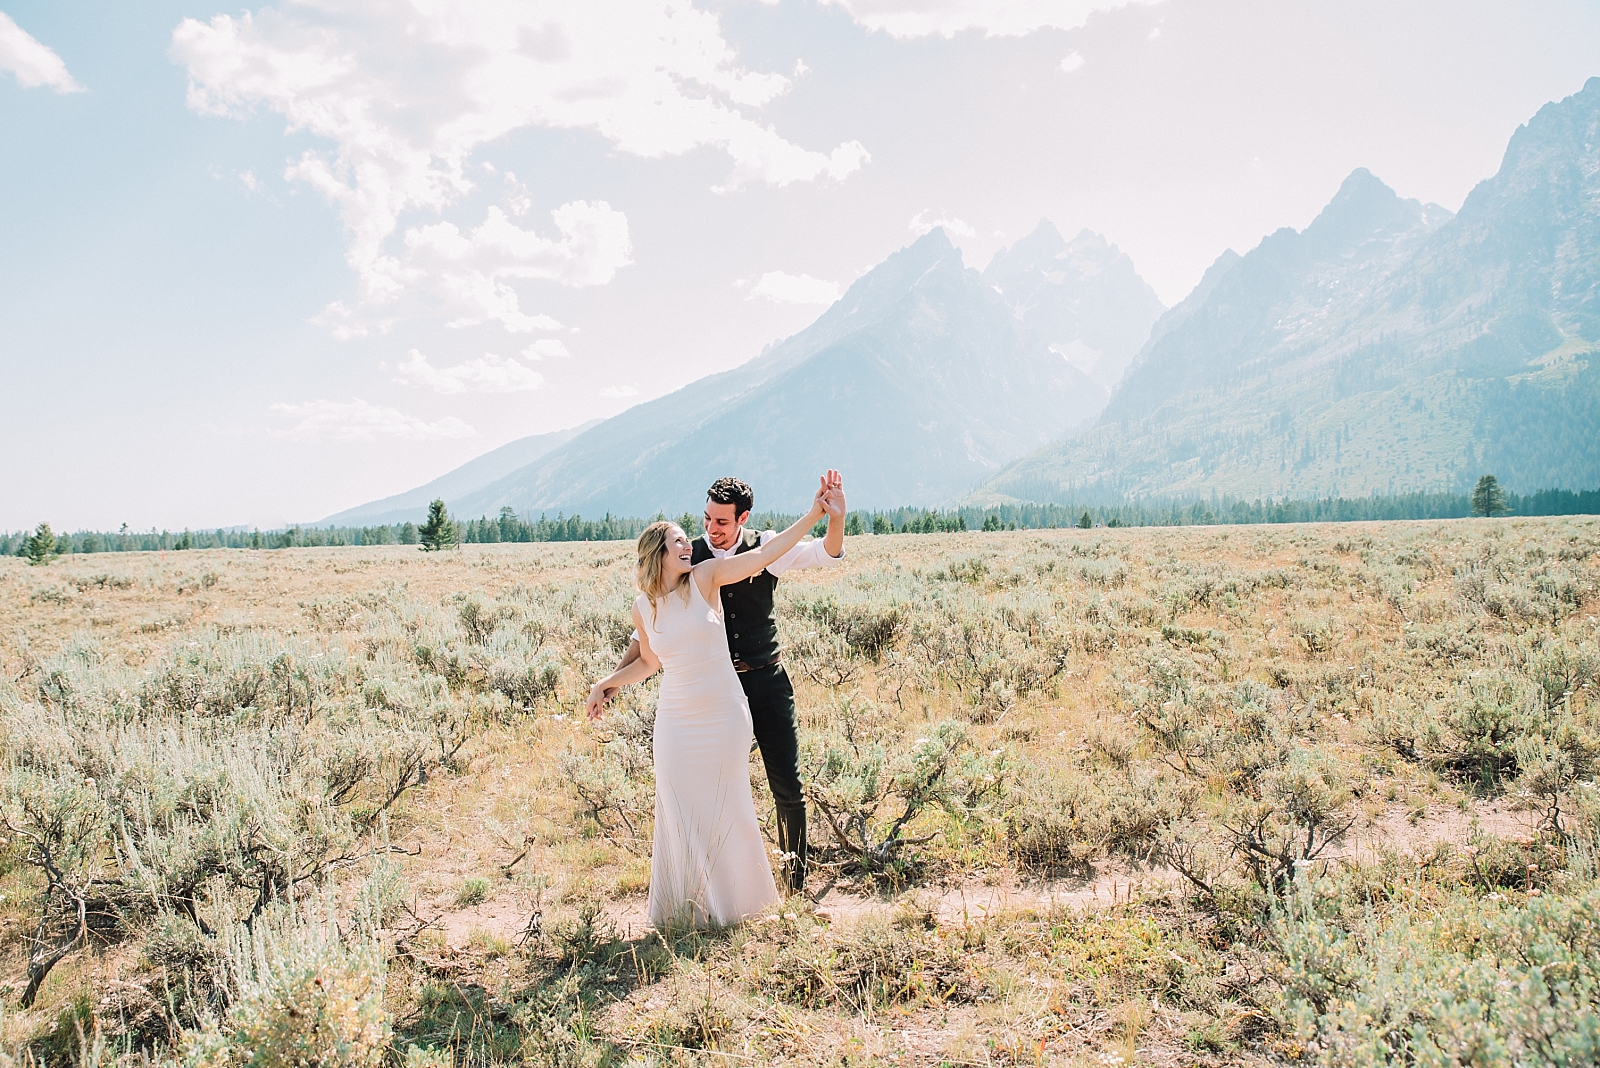 Lively Jewish Wedding Ceremony in The Tetons - Janelle & Co Photo